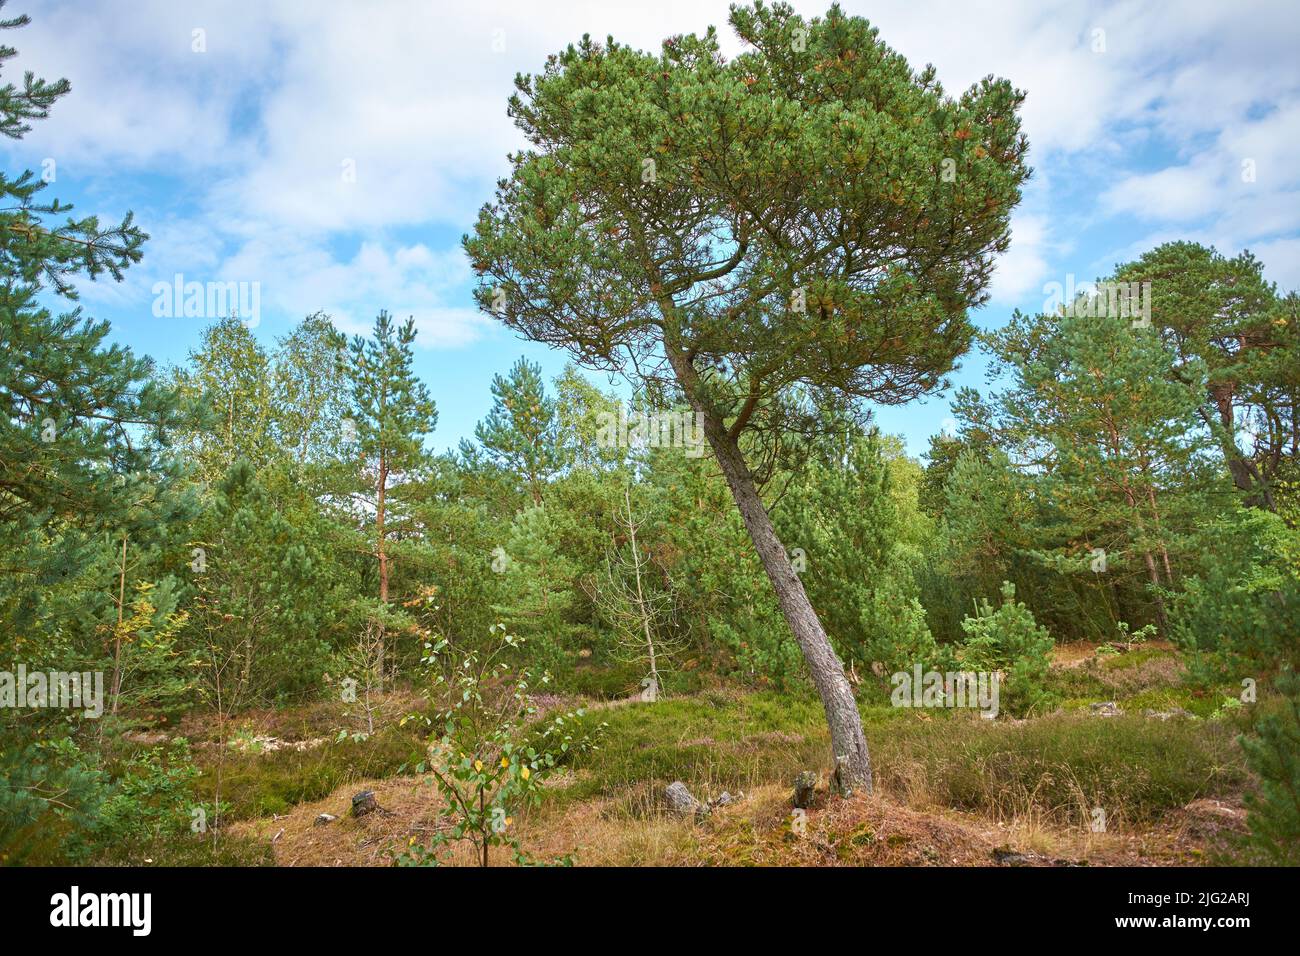 Pine tree forest with green shrubs on a cloudy blue sky. Lush greenery in a secluded land or undisturbed nature environment. A beautiful wild hiking Stock Photo